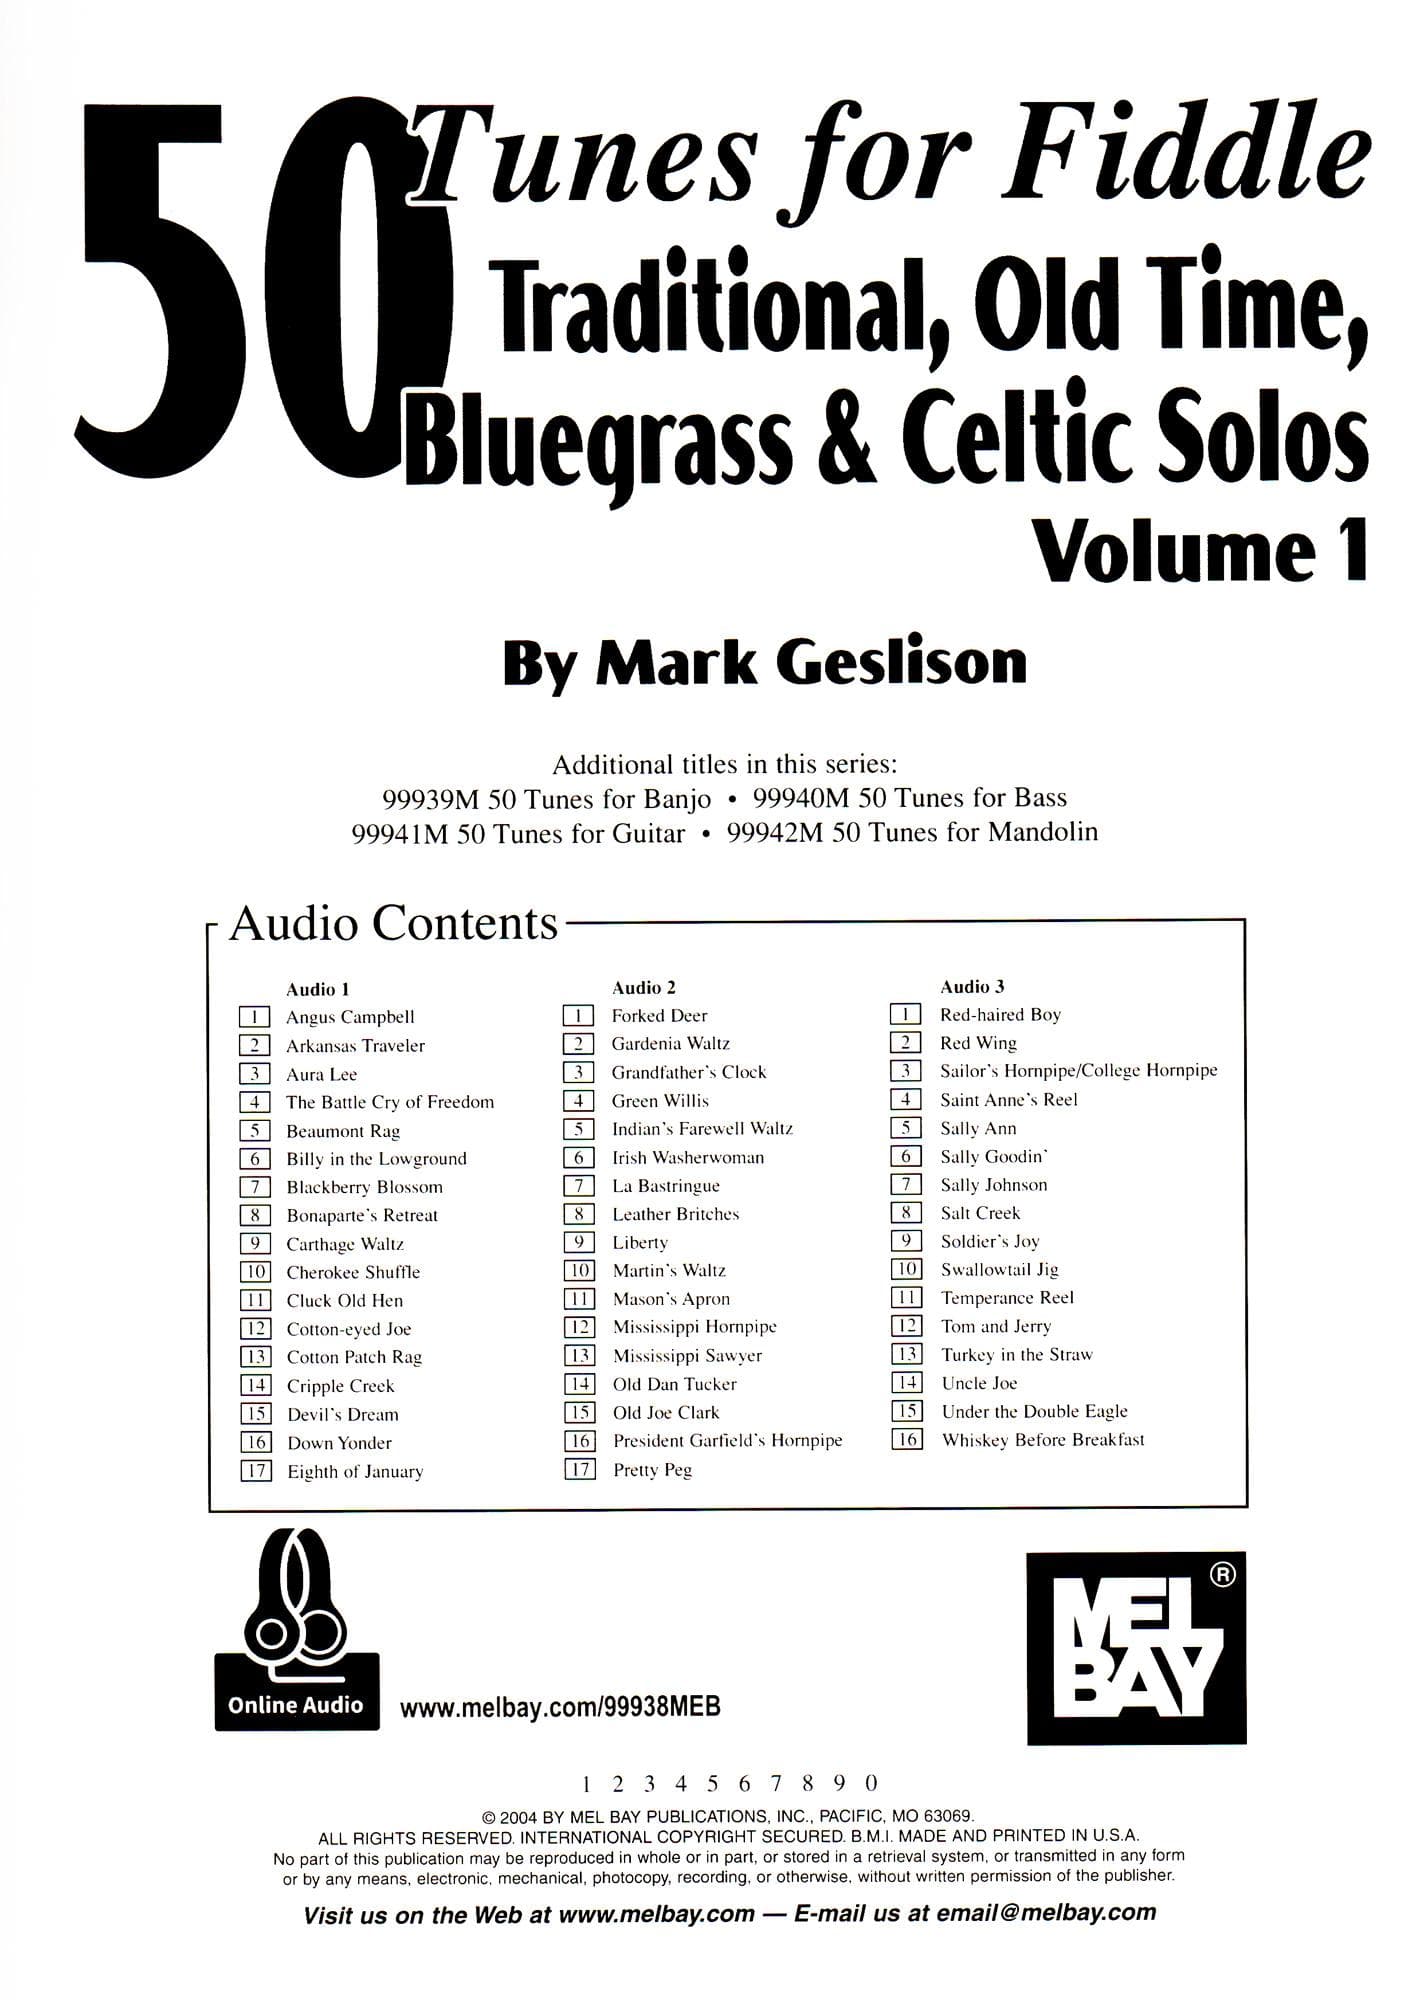 50 Tunes for Fiddle, Volume 1: Traditional, Old Time, Bluegrass and Celtic Solos - Violin solo with Online Audio - by Mark Geslison - Mel Bay Publications